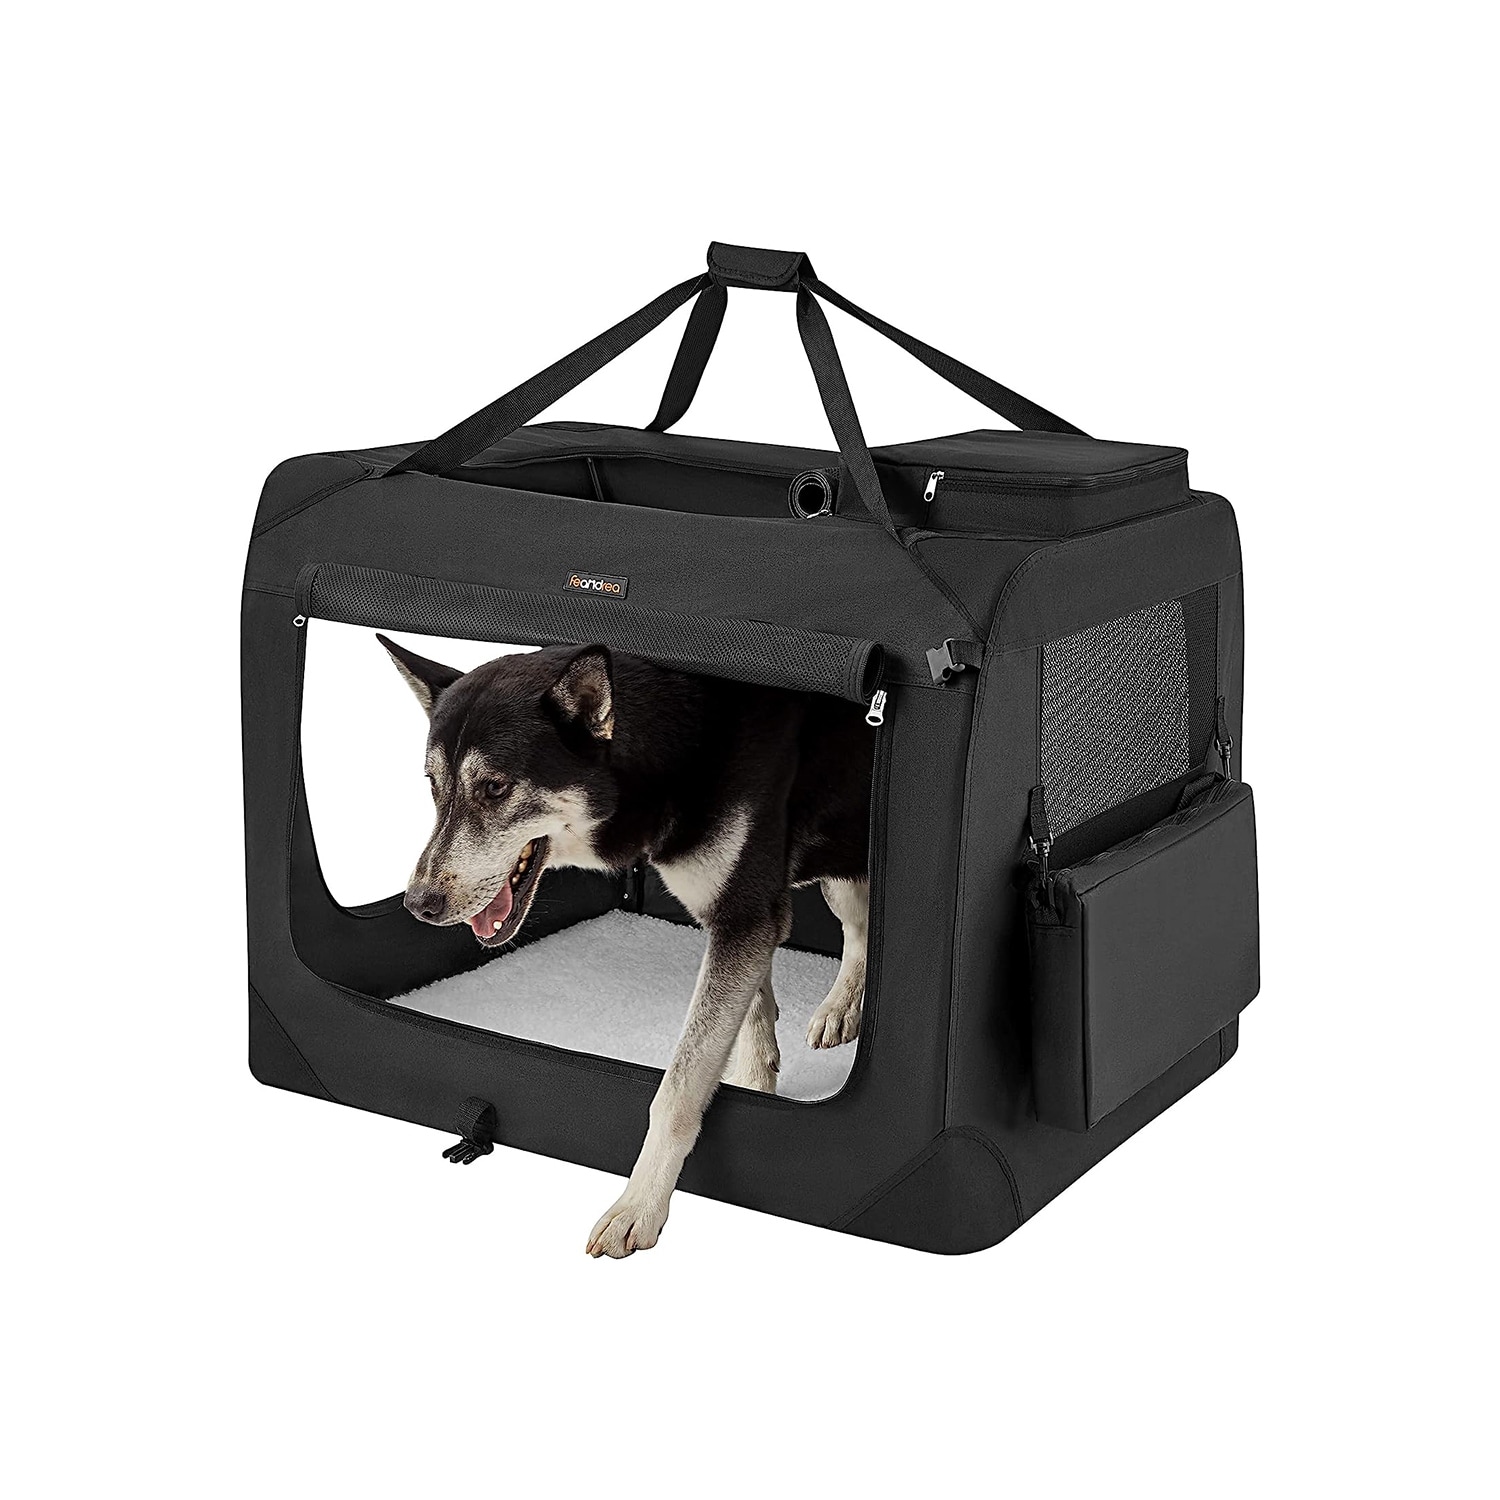 https://ak1.ostkcdn.com/images/products/is/images/direct/41559e118d8d6ce8fb094795f5569f8236bdc7ba/Collapsible-Pet-Crate%2C-XXXL%2C-Portable-Soft-Dog-Crate%2C-Oxford-Fabric%2C-Mesh%2C-Metal-Frame%2C-with-Handle%2C-Storage-Pockets.jpg